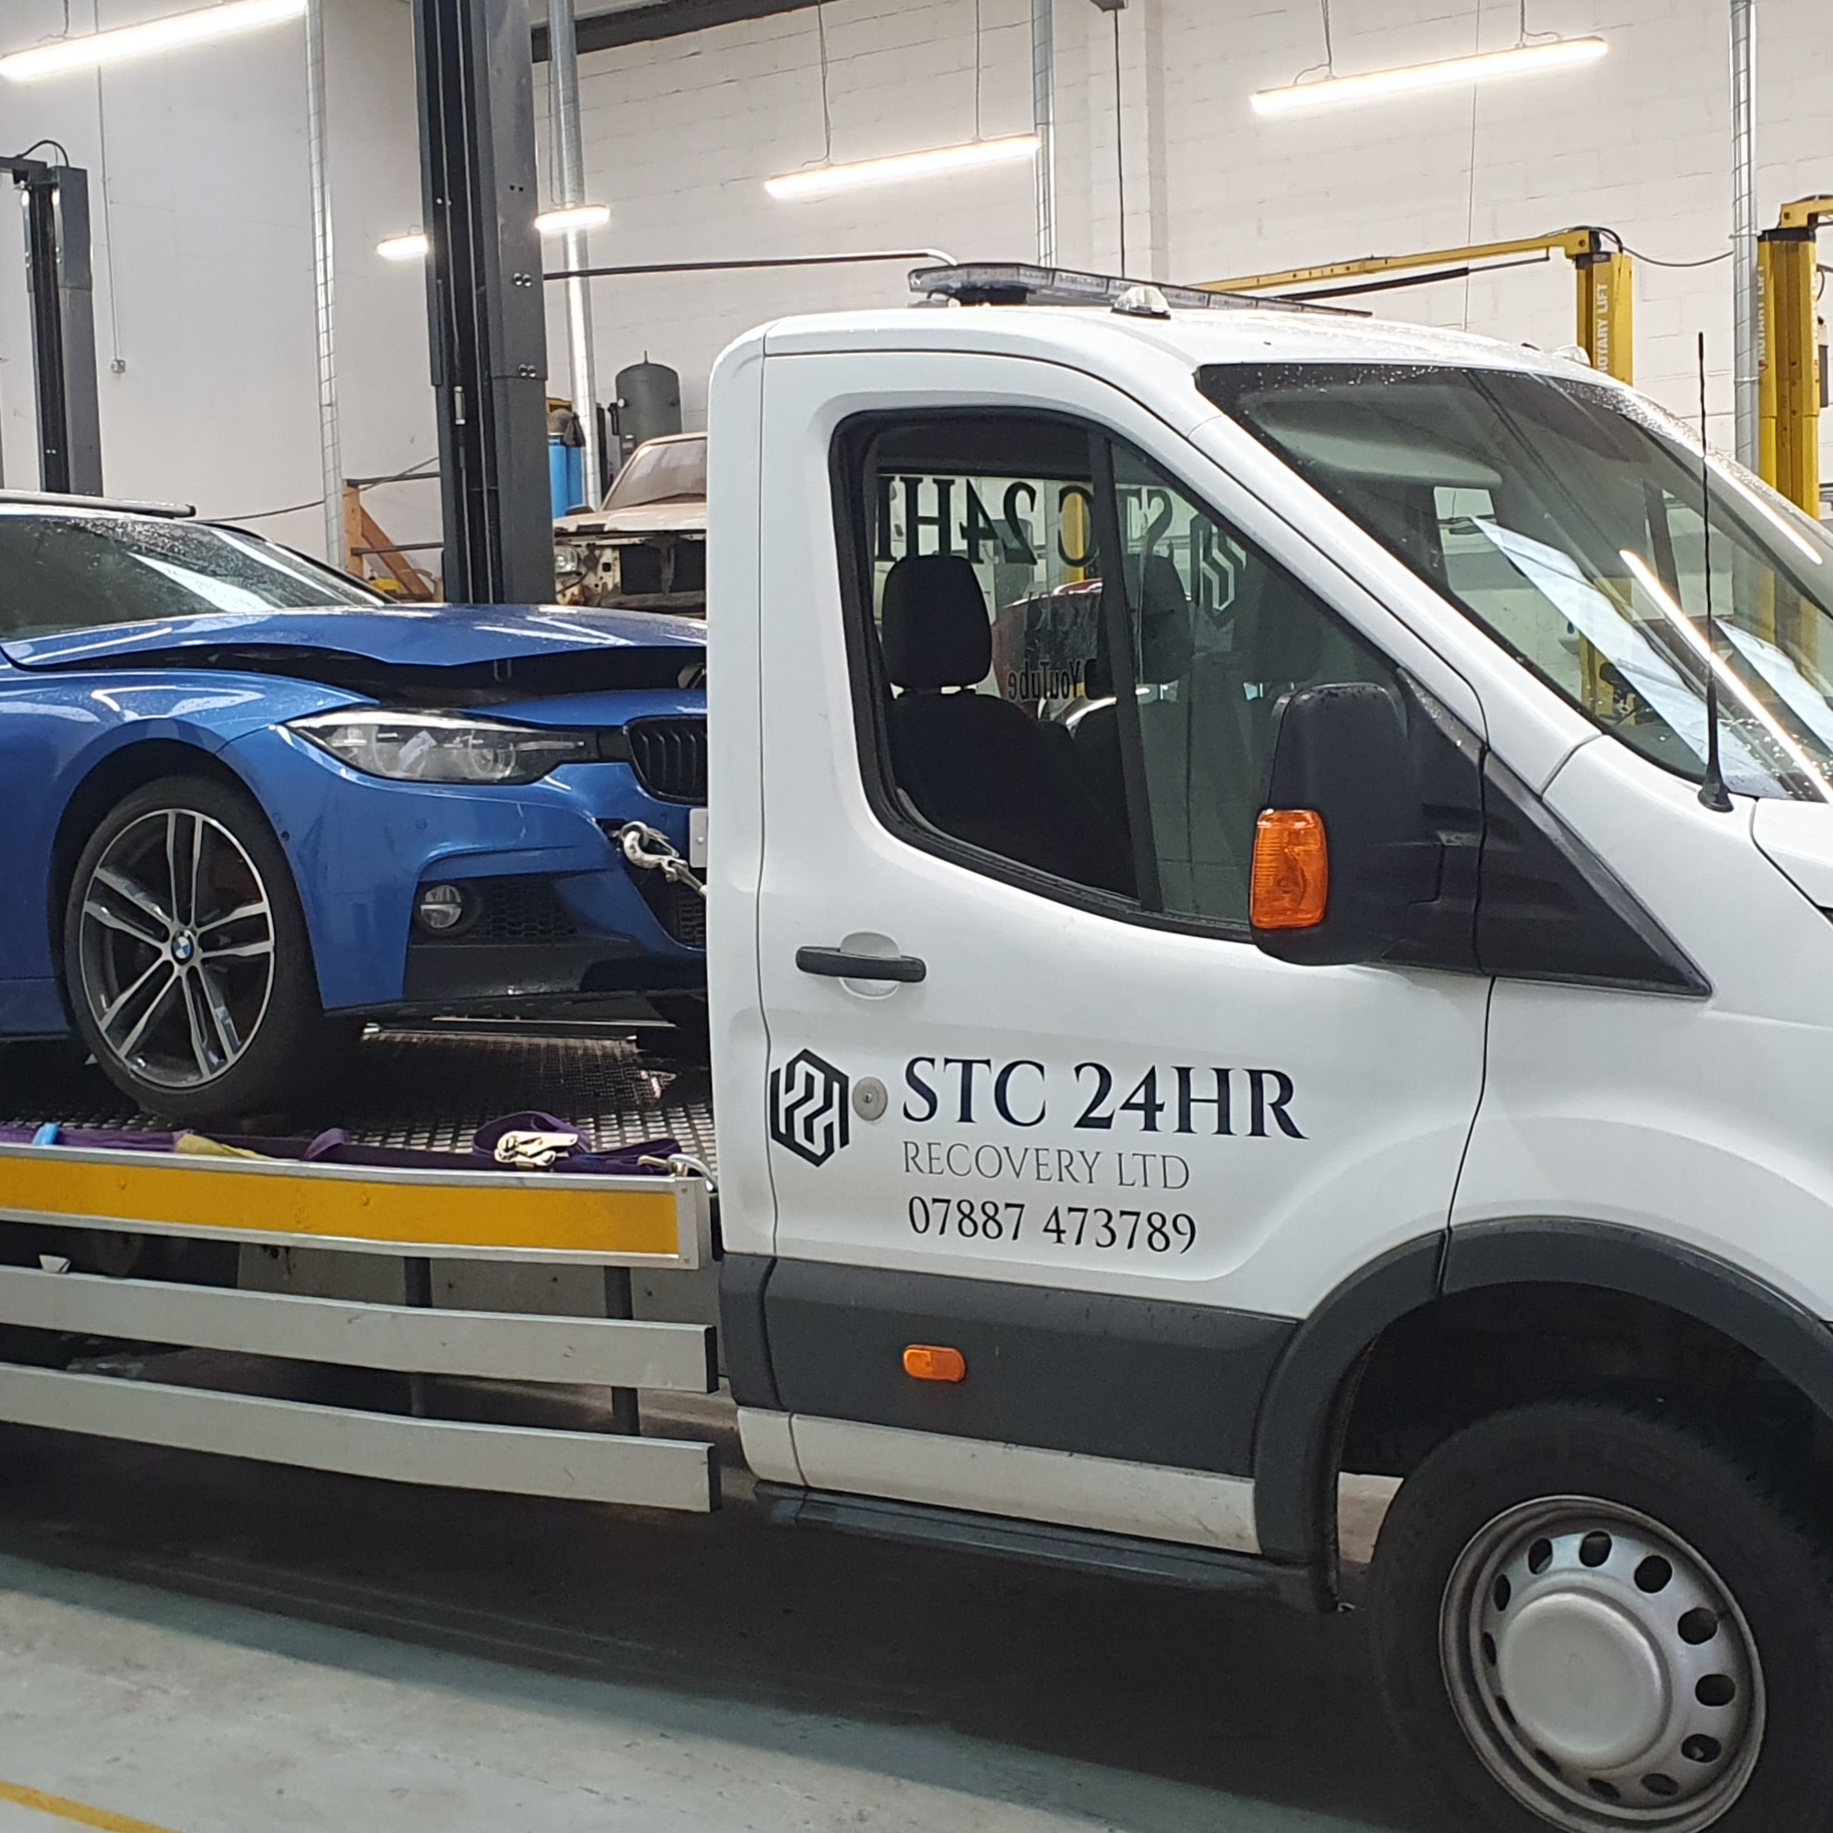 Images STC 24hr recovery ltd